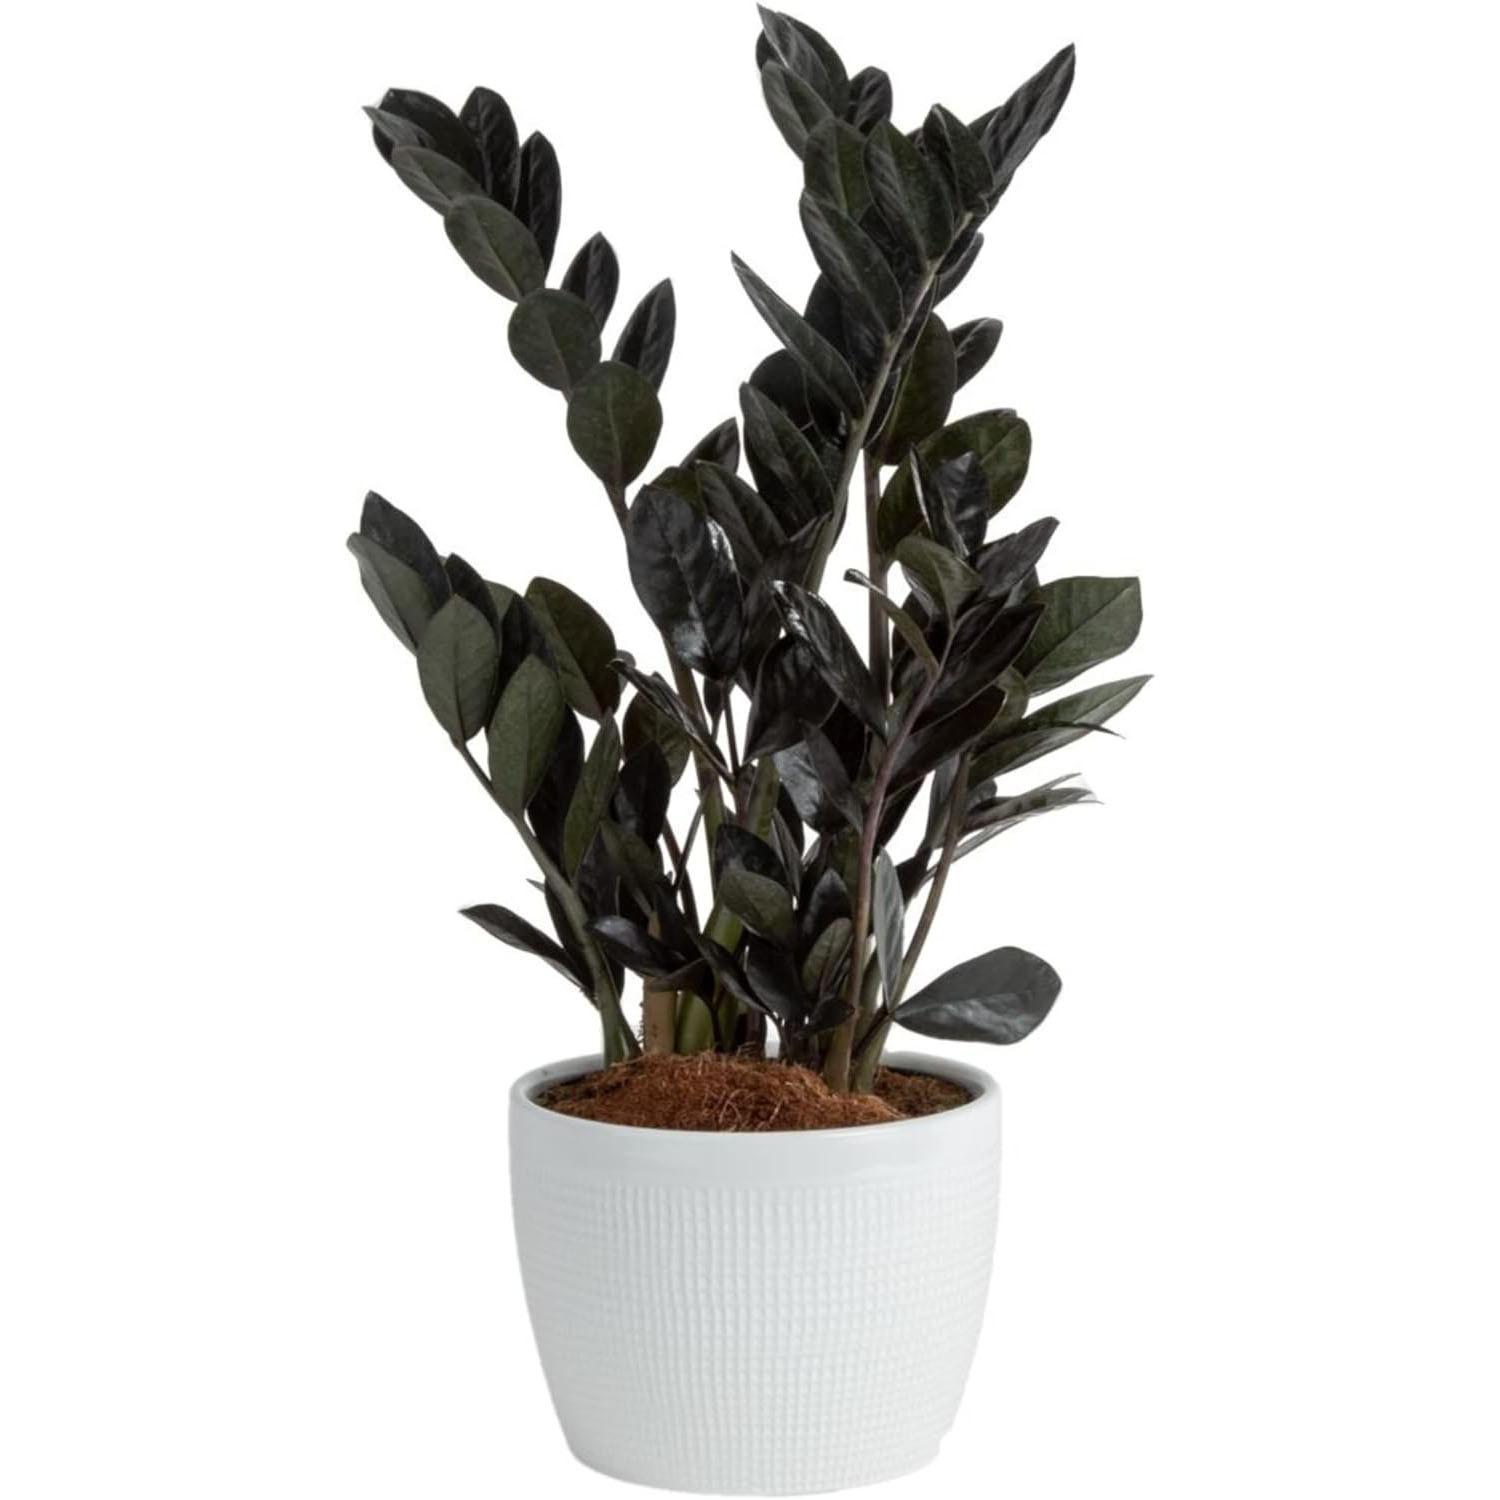 10in Costa Farms Raven ZZ Live Indoor Houseplant for $18.40